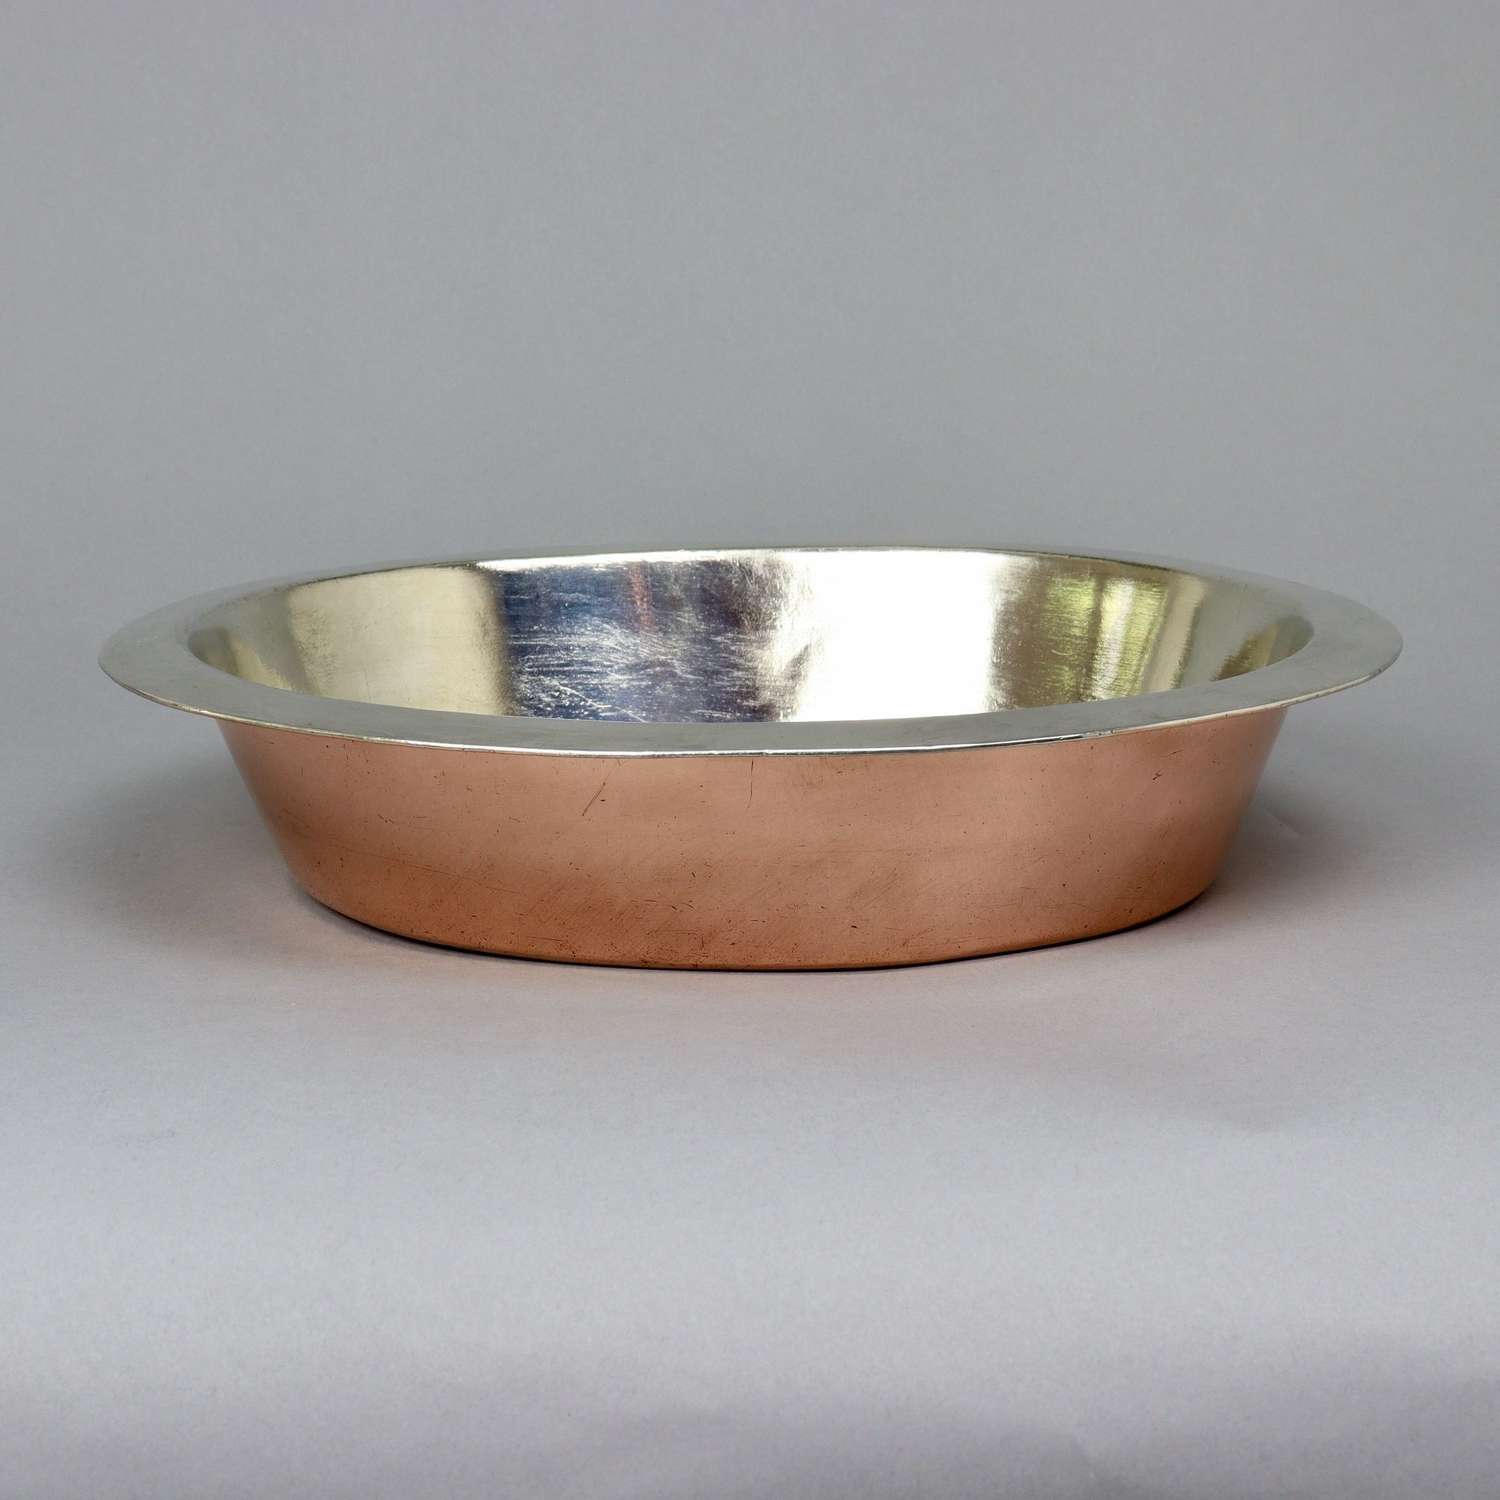 Large, Oval, Copper Flat Rimmed Pie Dish